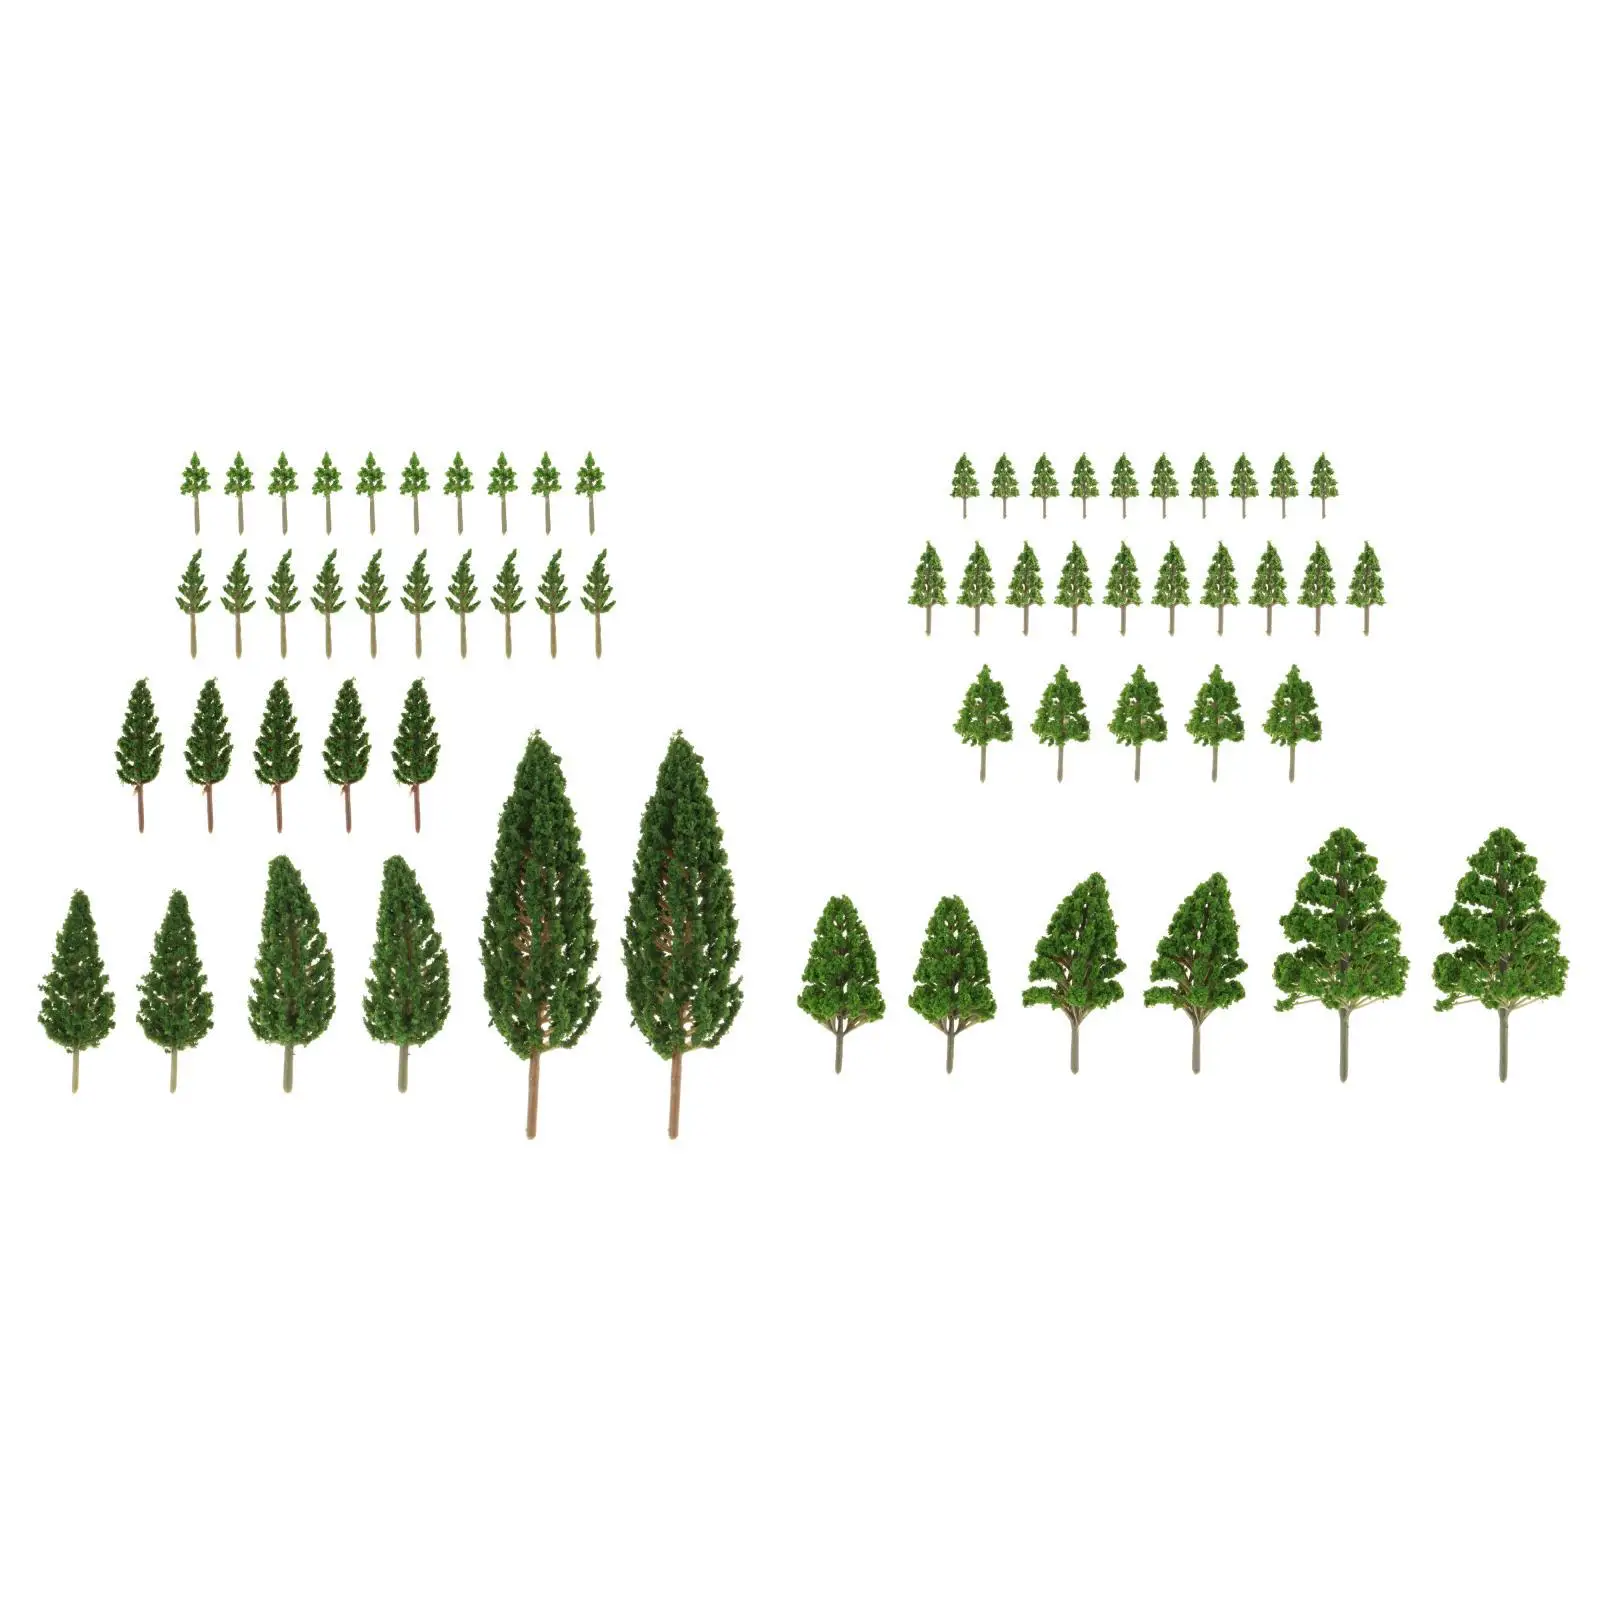 62x Simulation Miniature Tree Miniature Trees Model for Miniature Scenery Building Model Diorama Layout Sand Table DIY Crafts